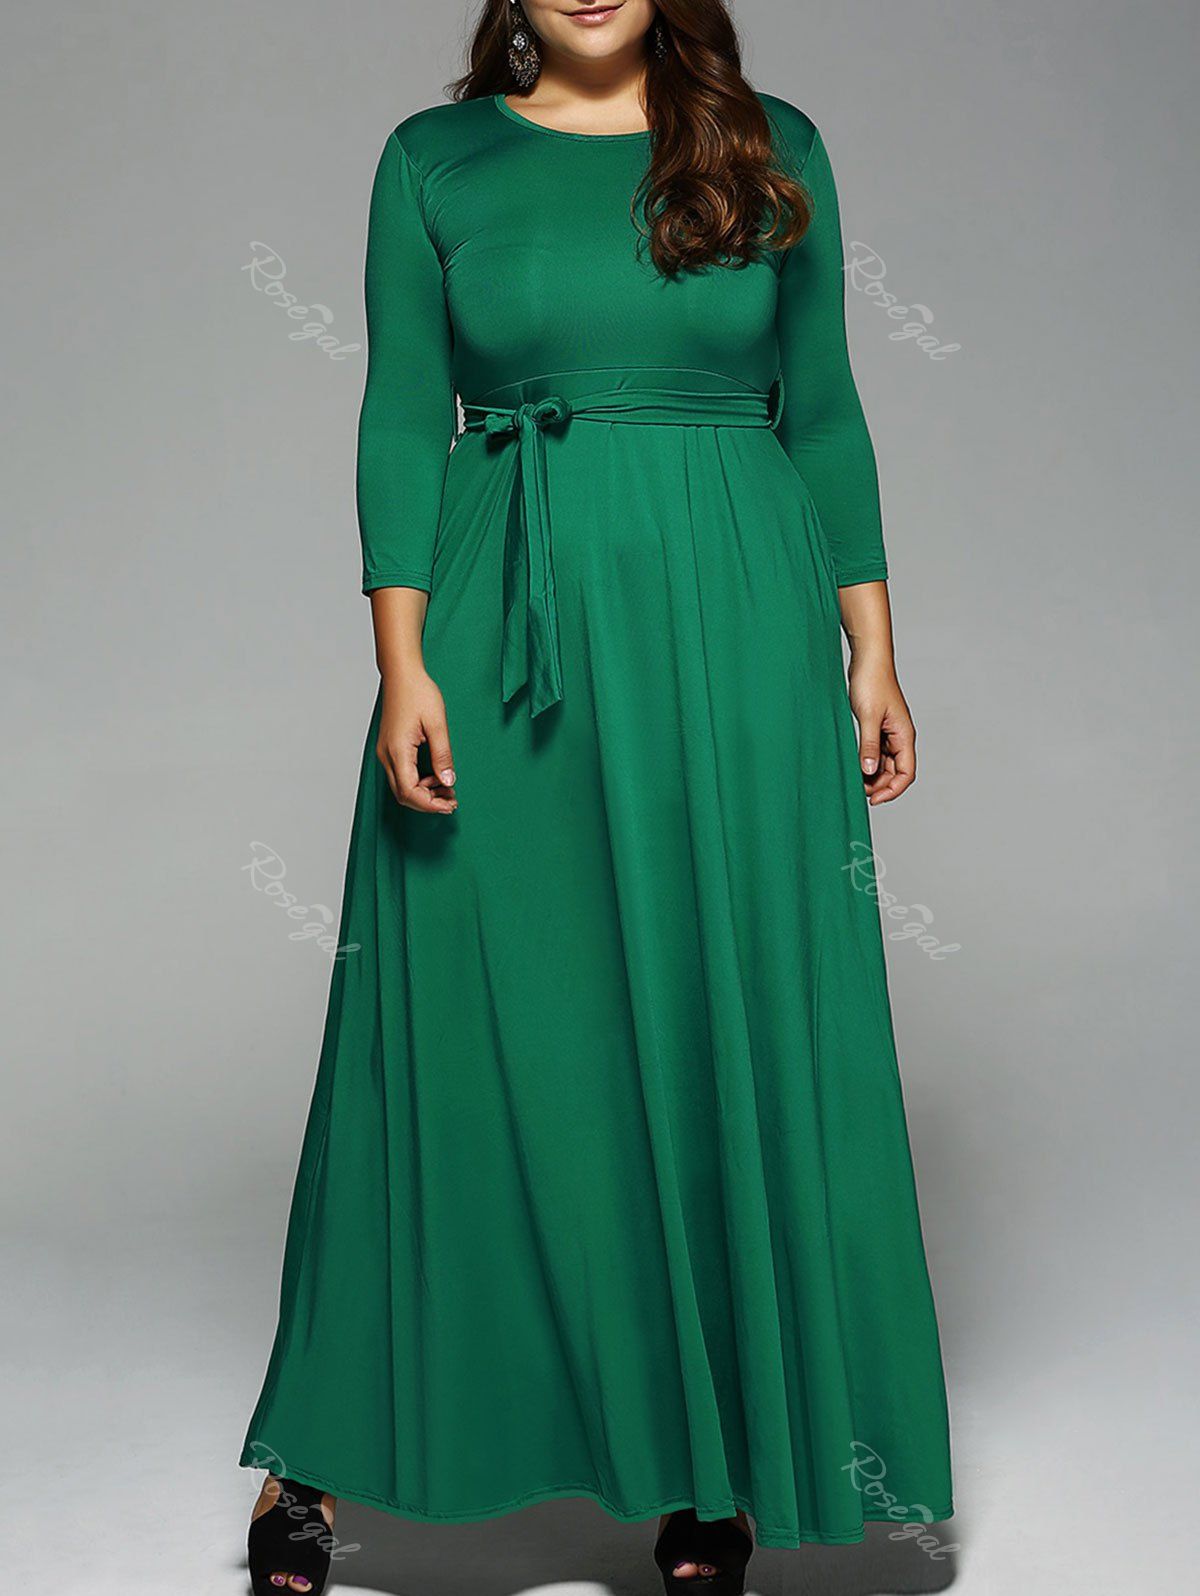 [34% OFF] Plus Size Long Sleeve Maxi Formal A Line Evening Swing Dress ...